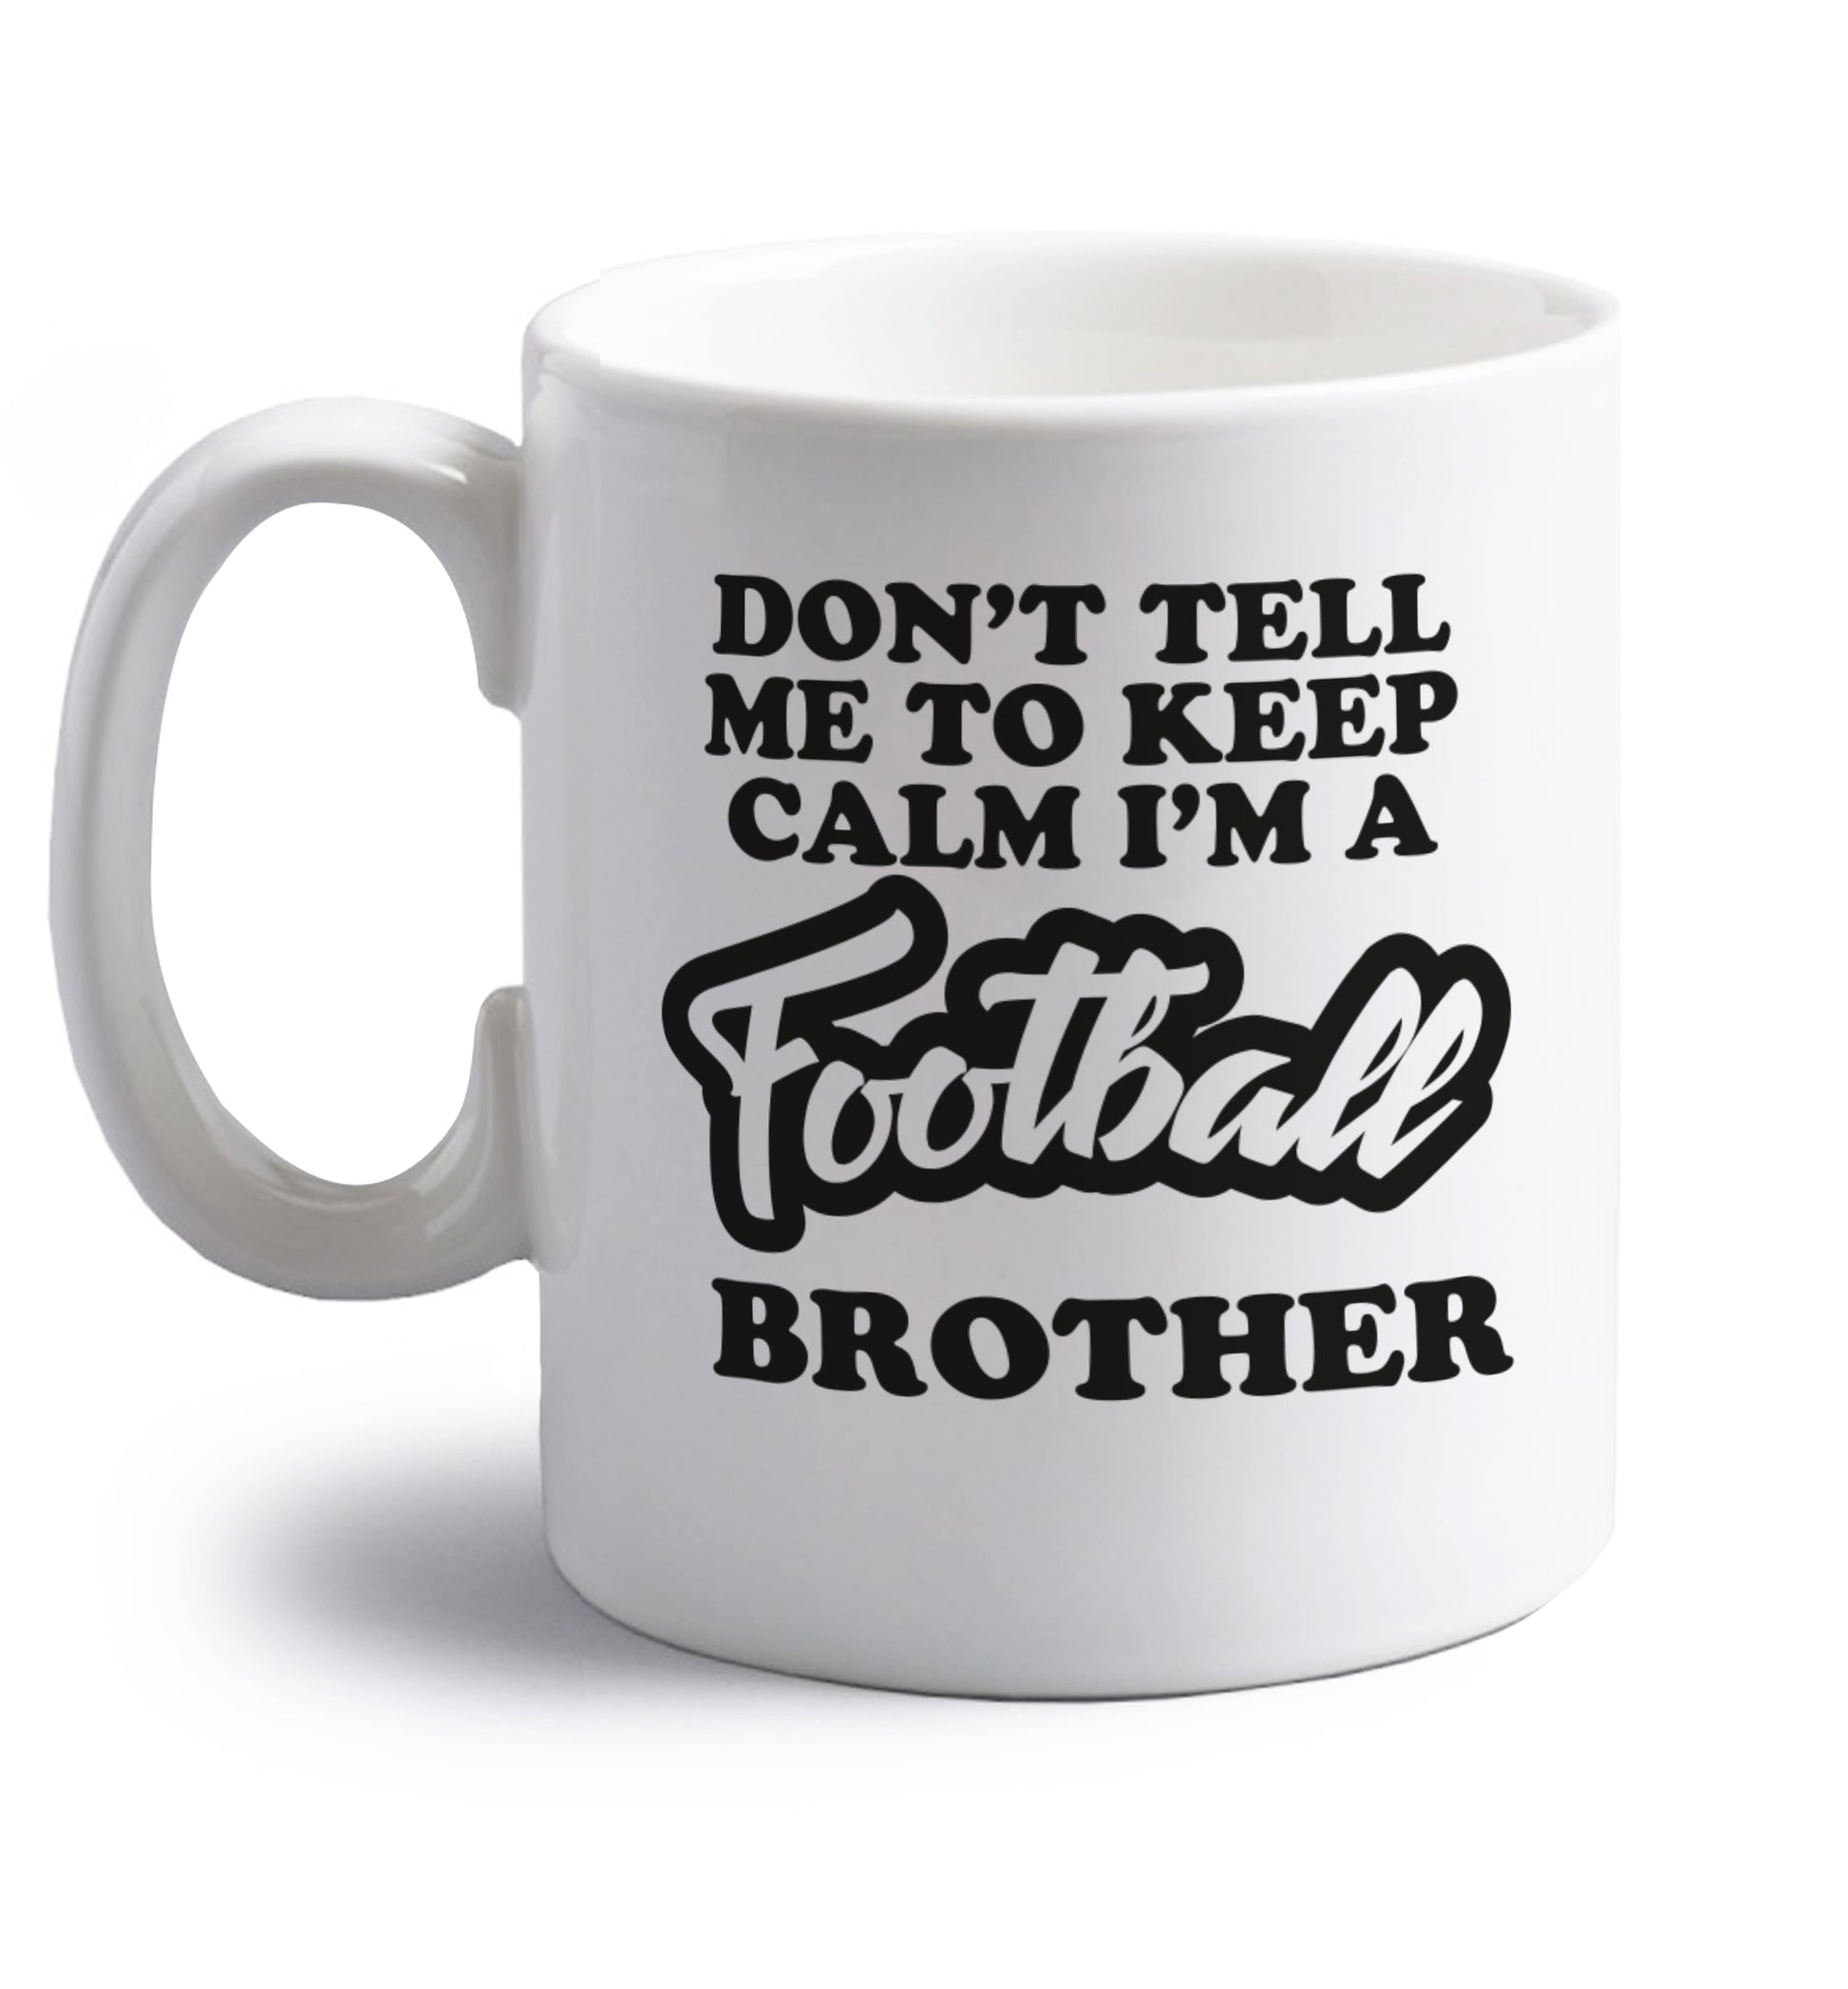 Don't tell me to keep calm I'm a football brother right handed white ceramic mug 